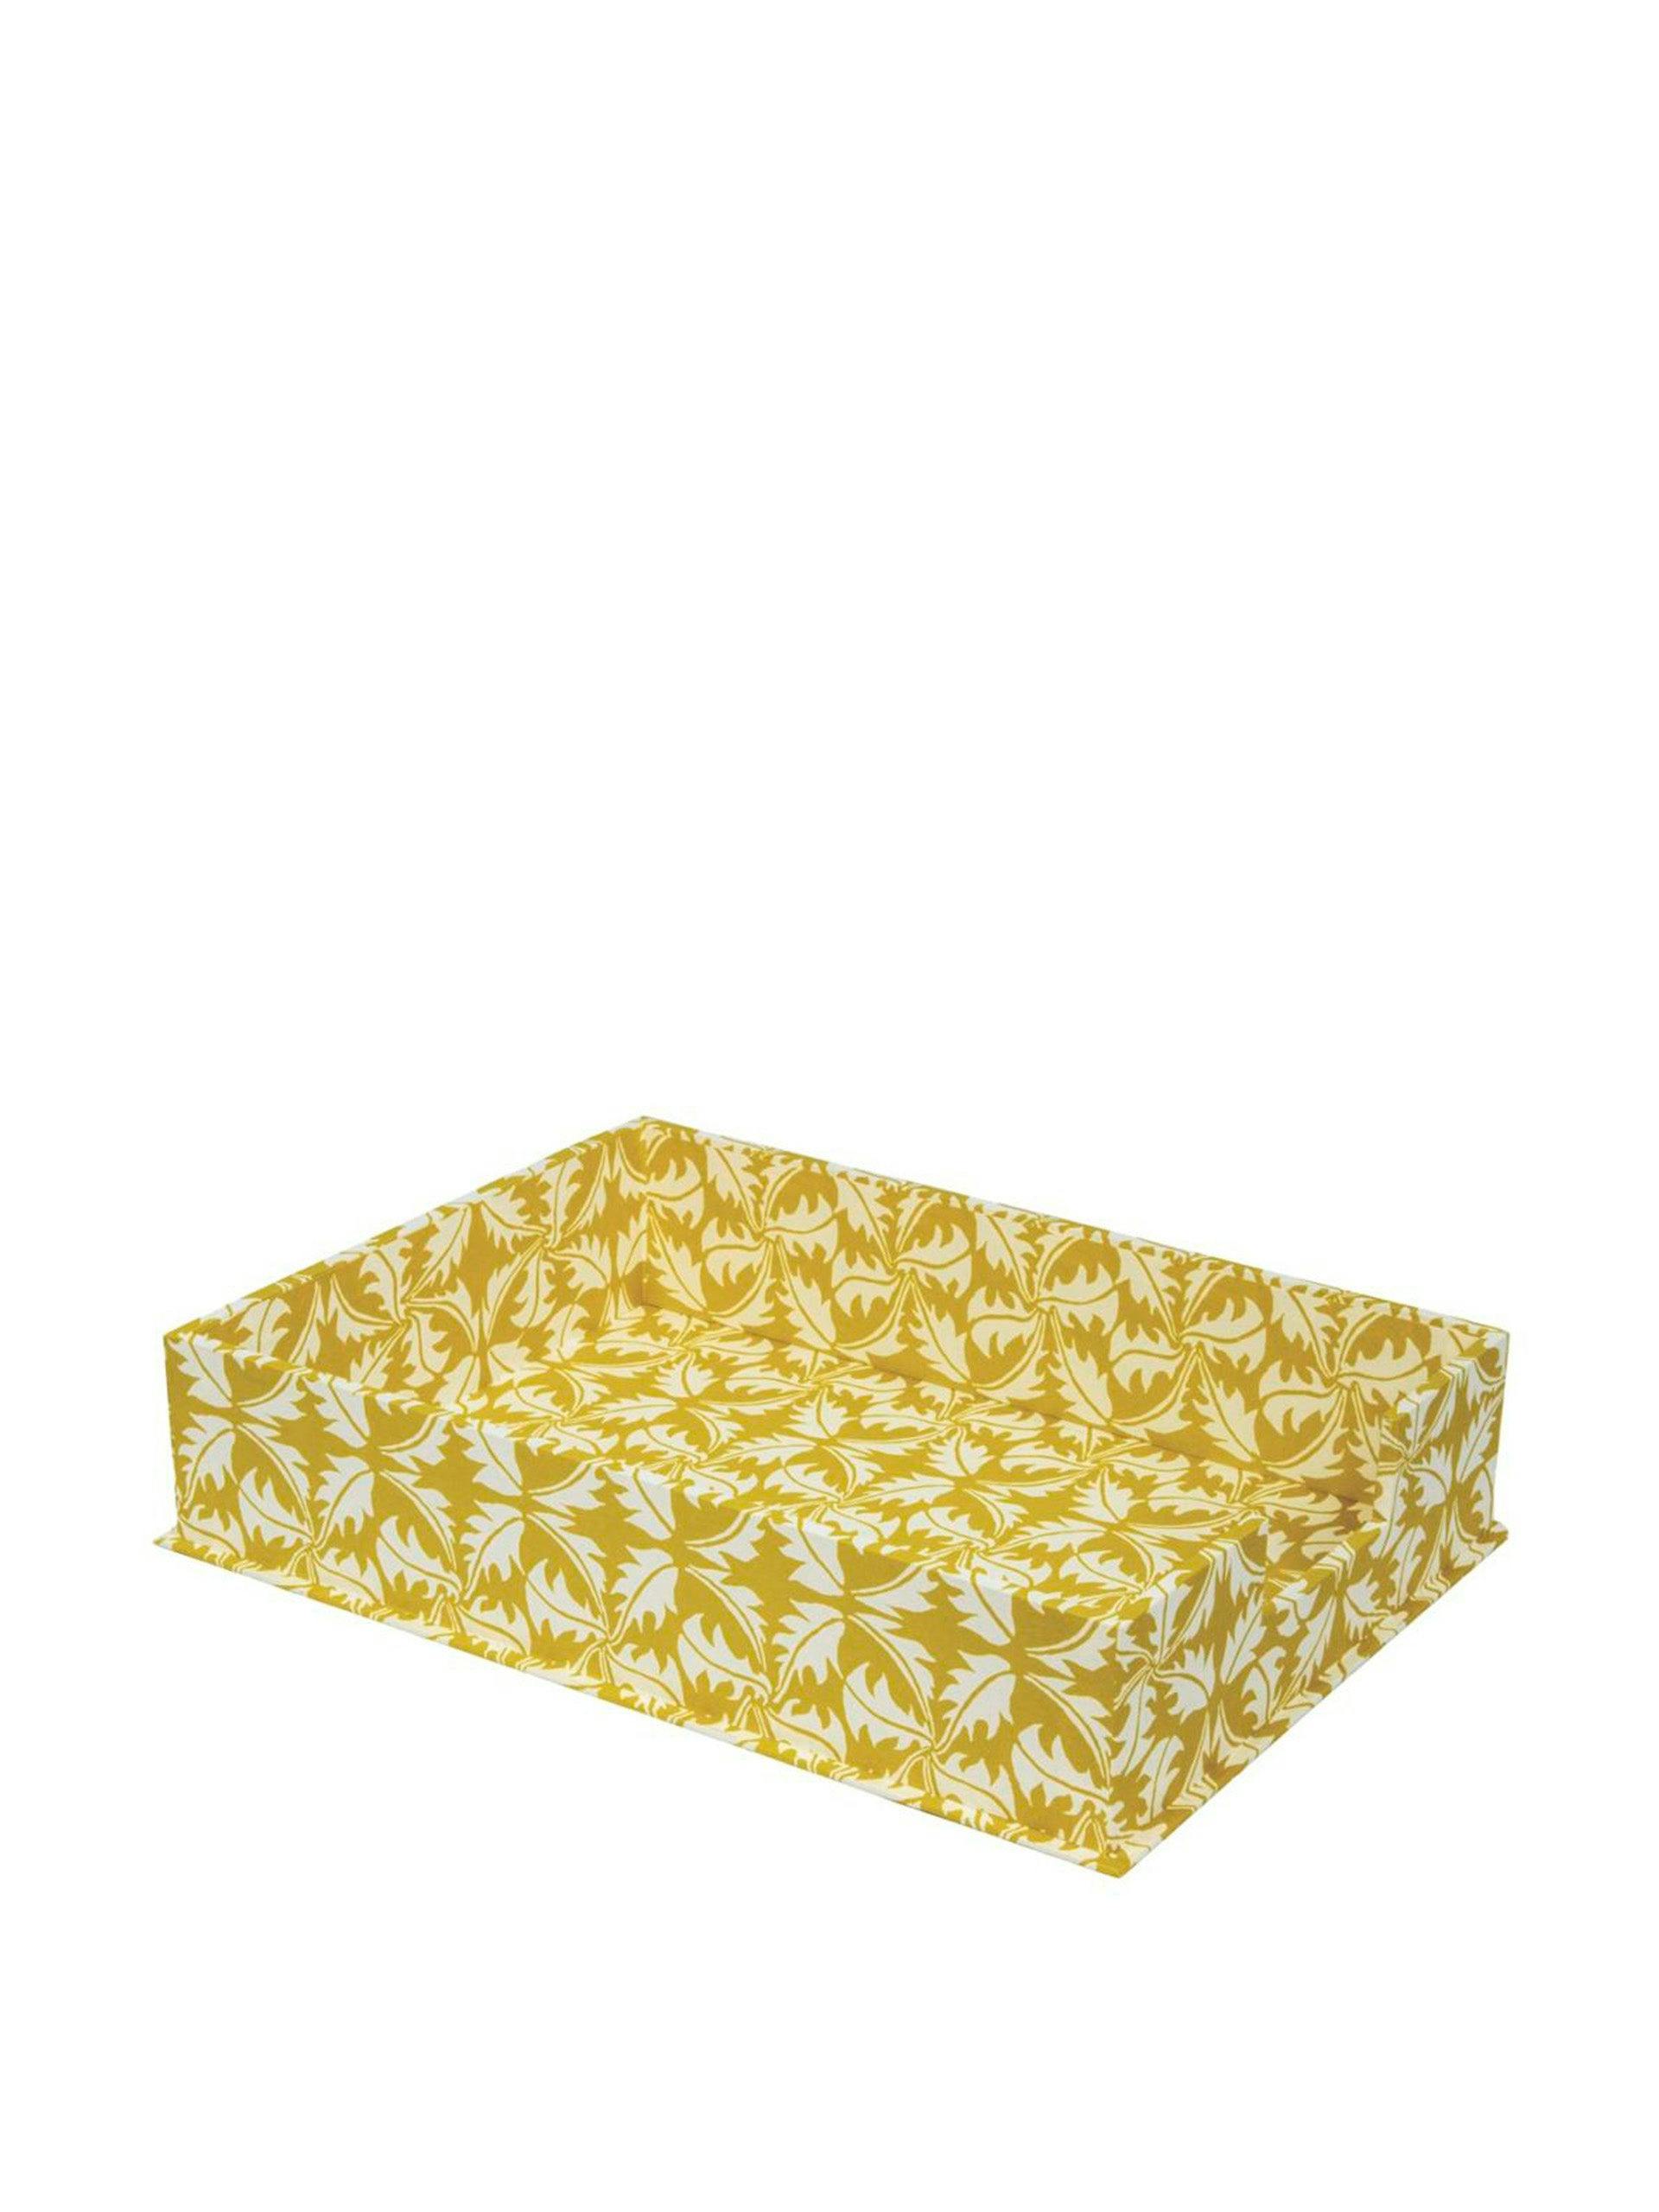 Yellow patterned letter tray